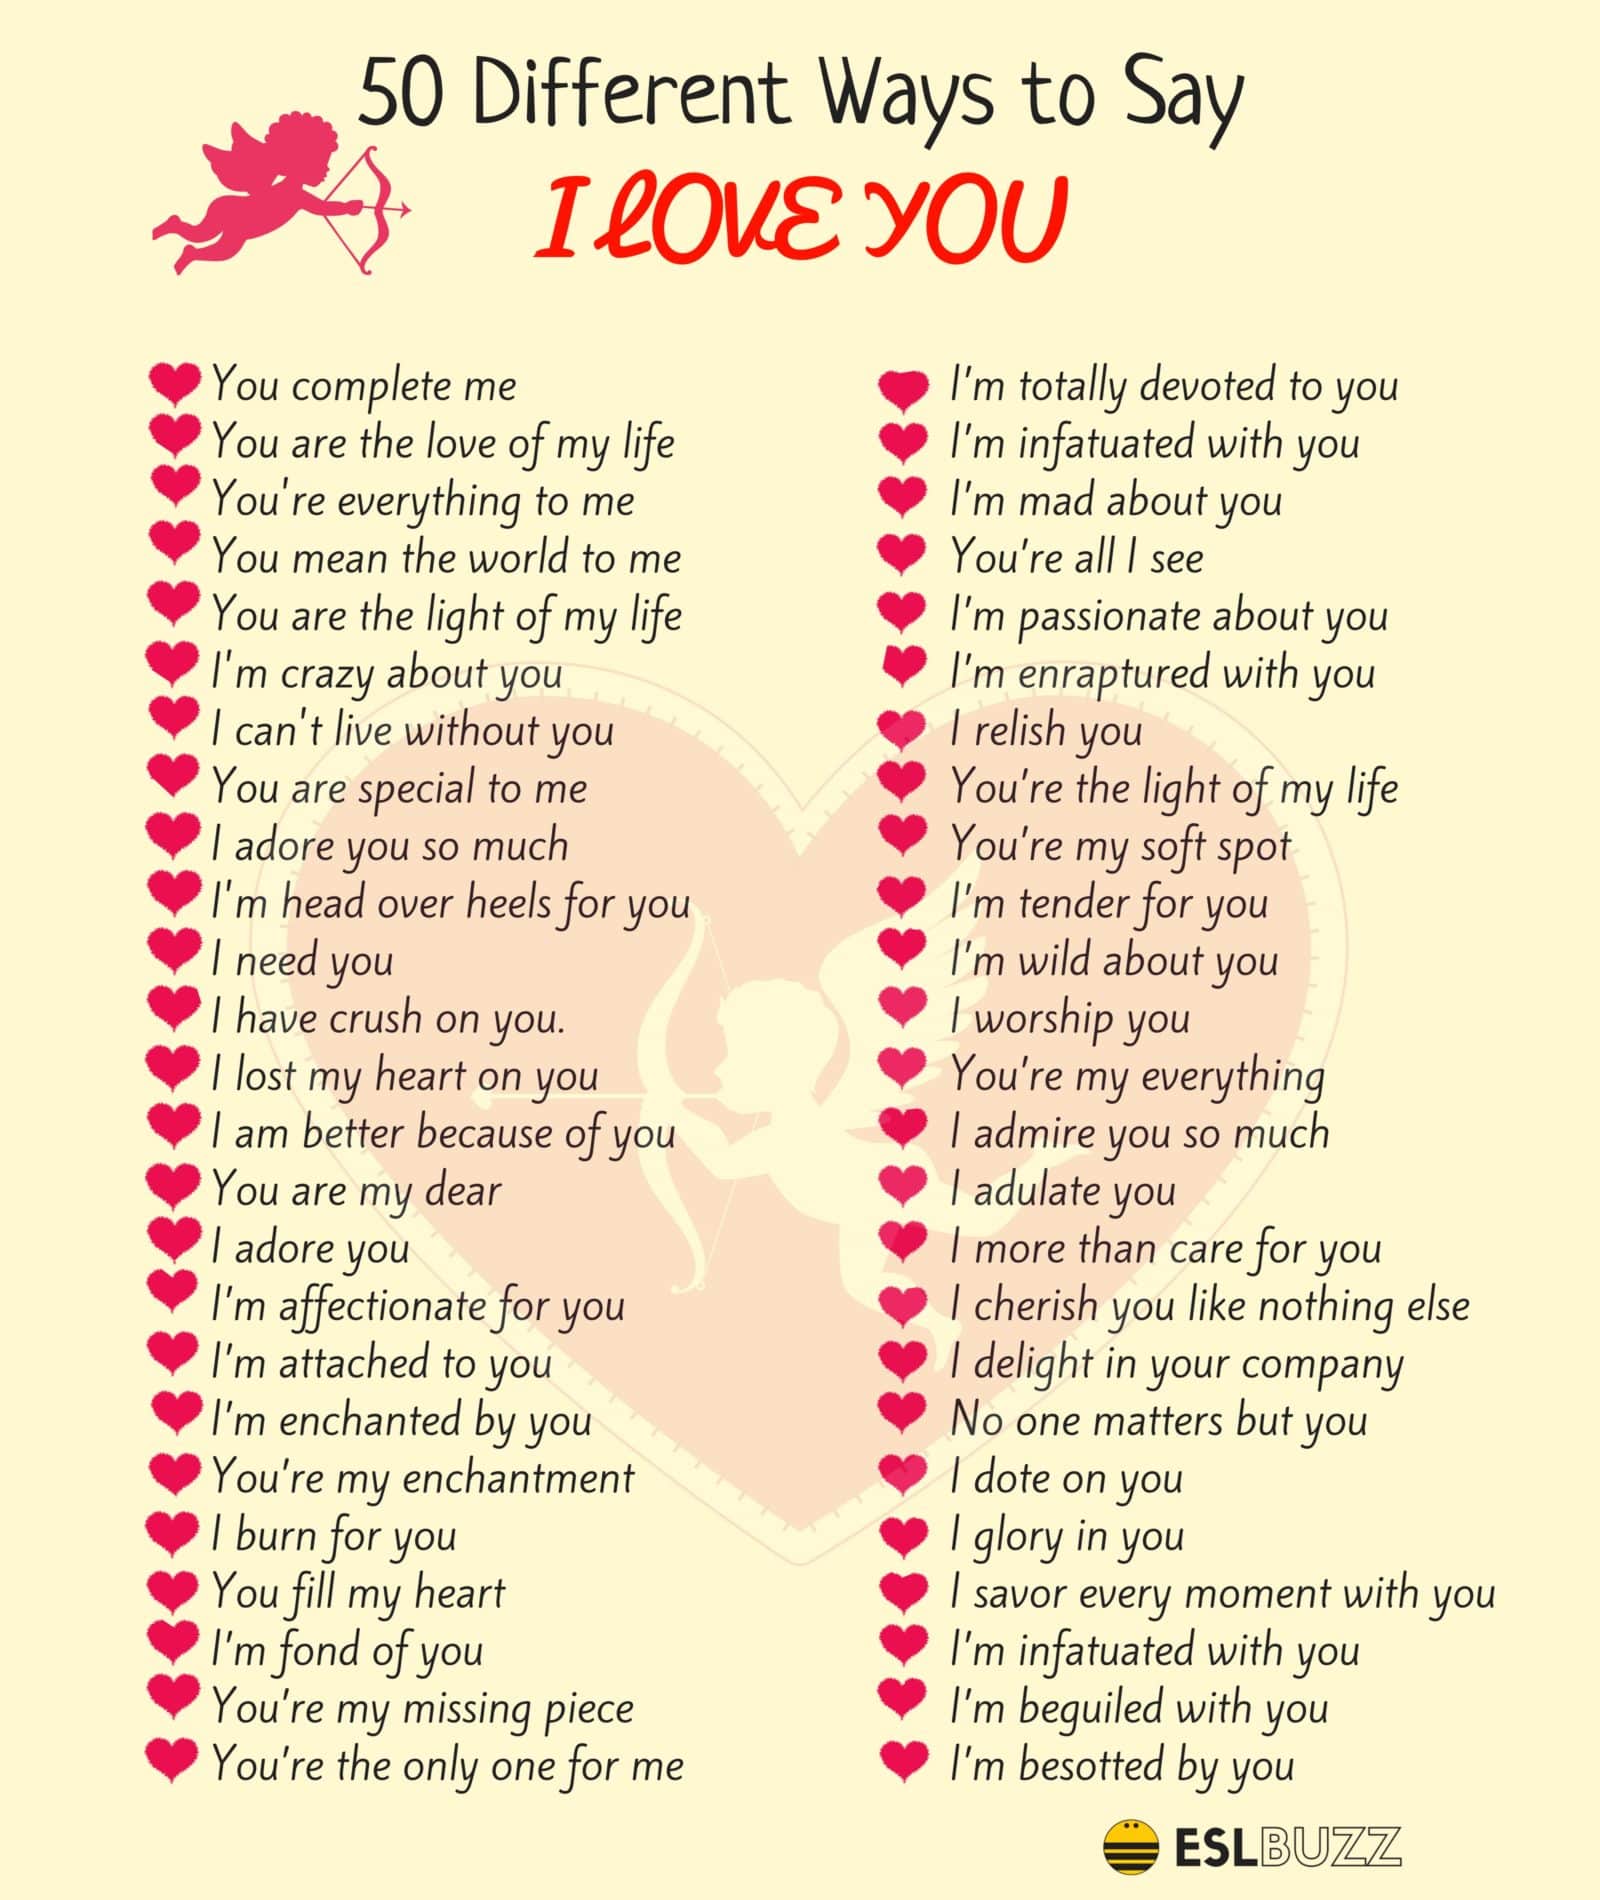 Other Ways To Say I LOVE YOU